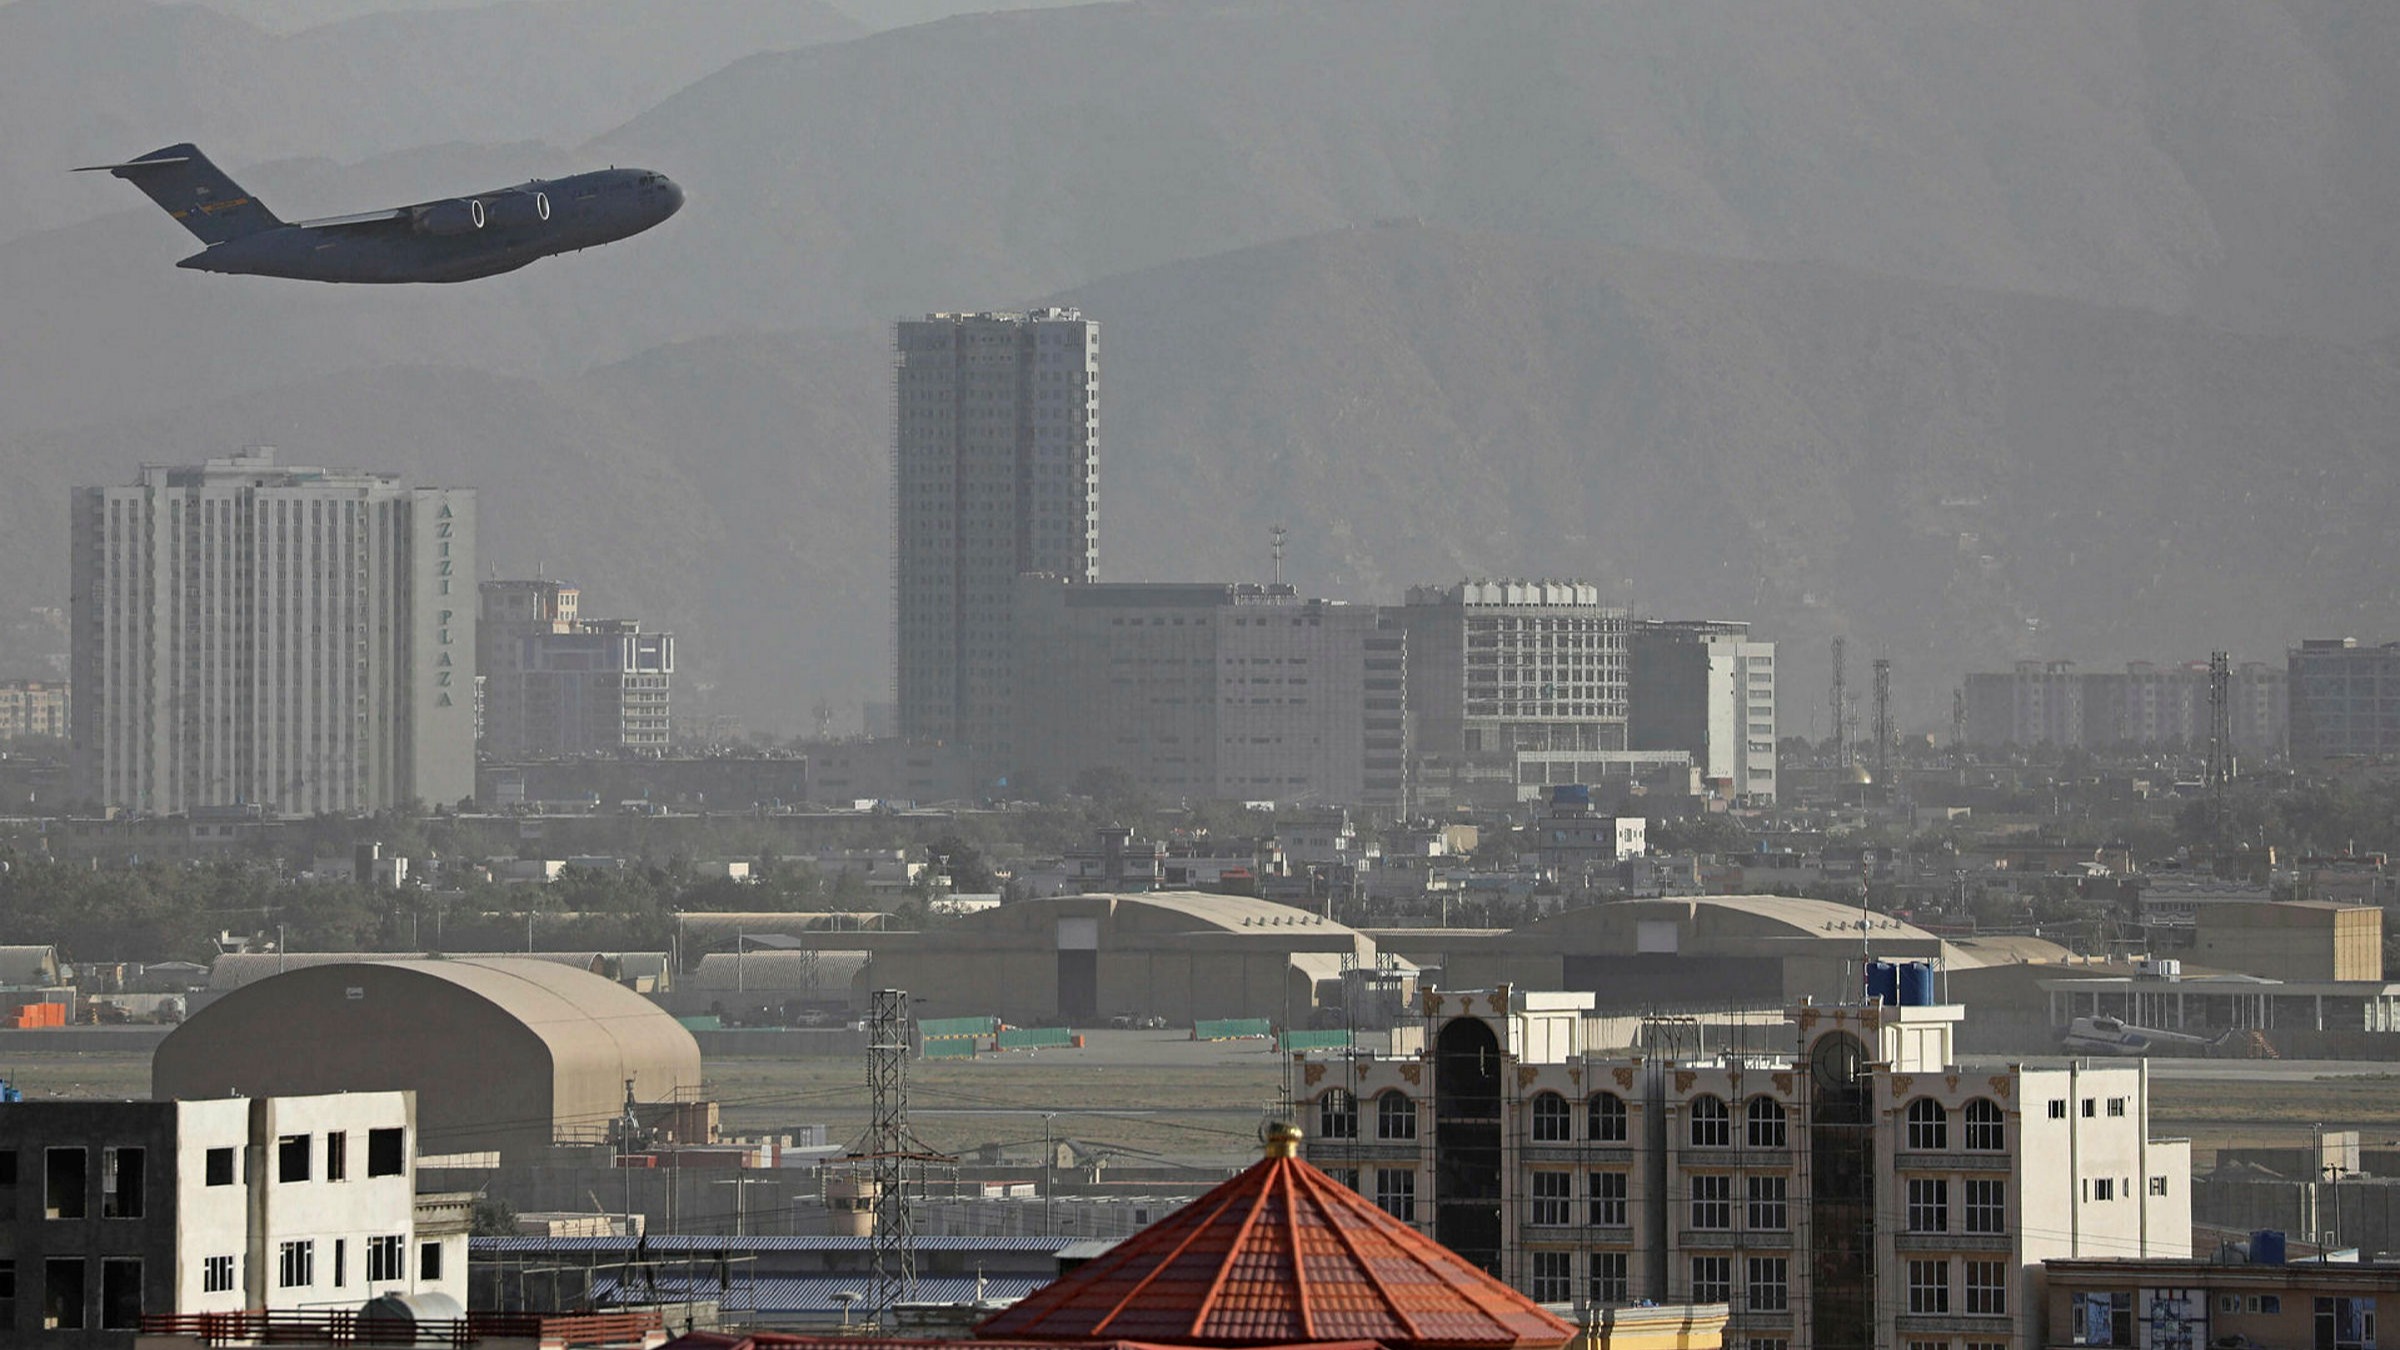 Kabul airport explosion